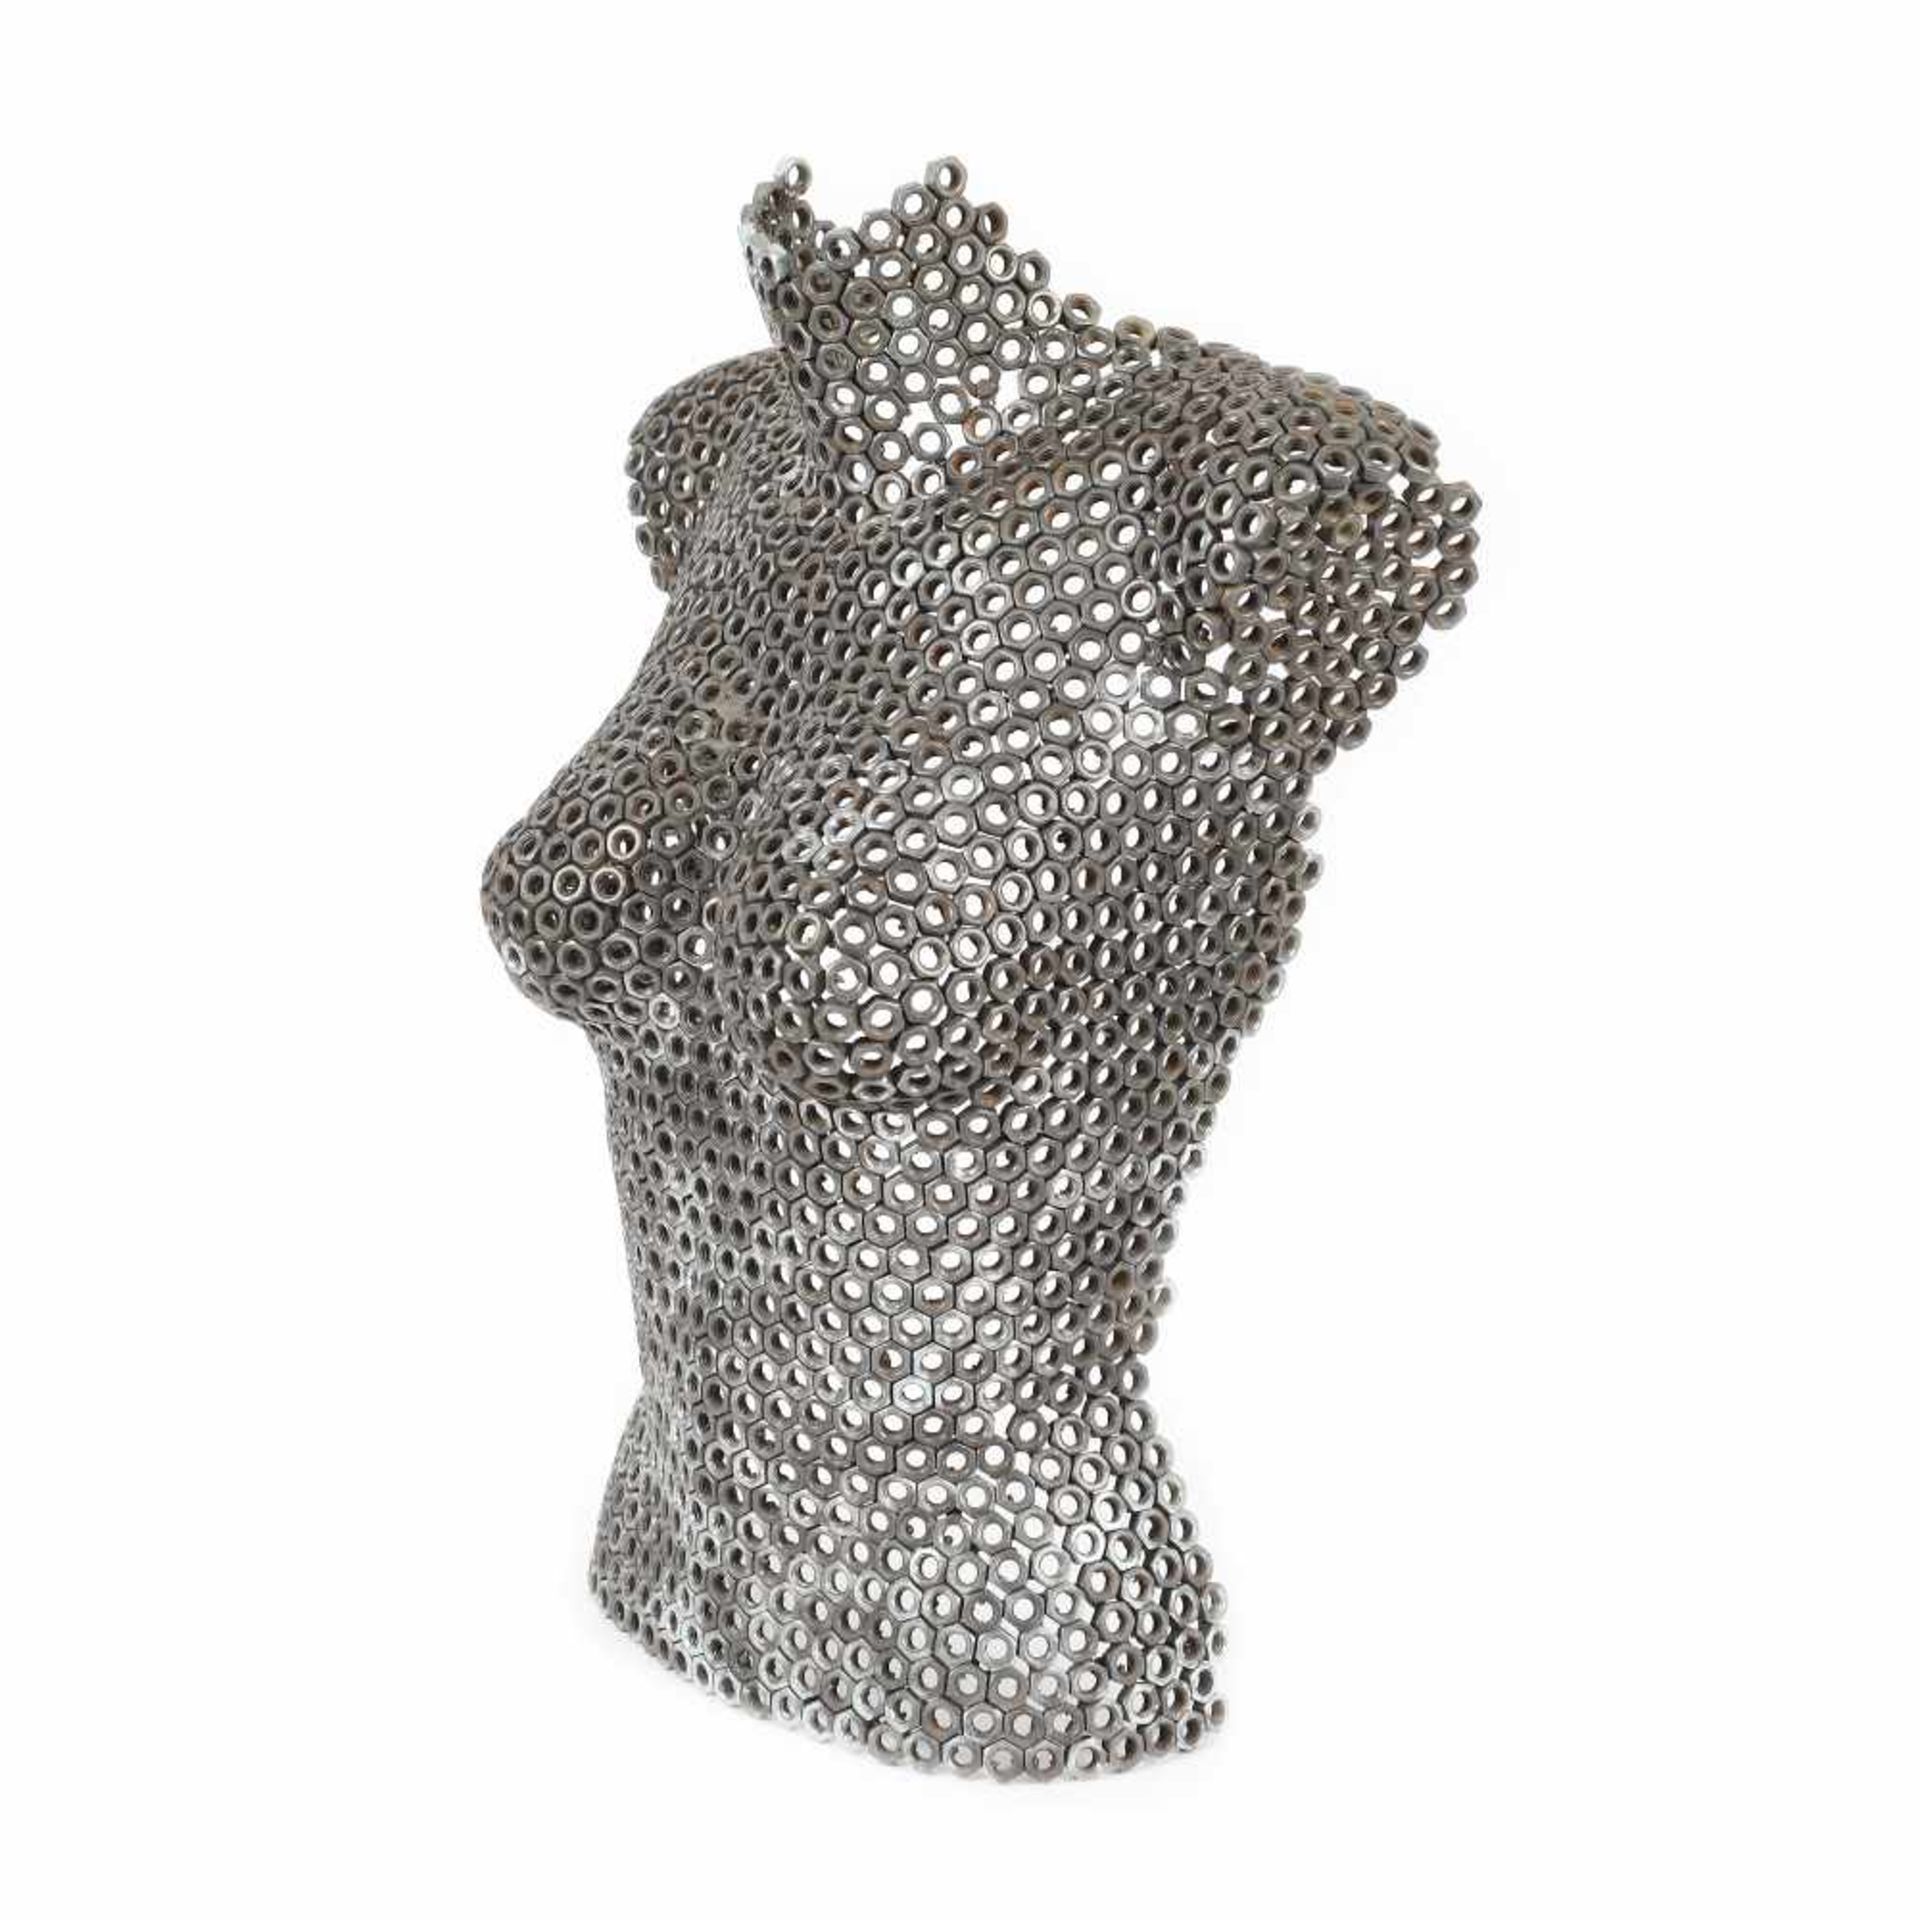 Engineer's muse - unique women's torso made of bolt nuts, 20th century - Image 2 of 3